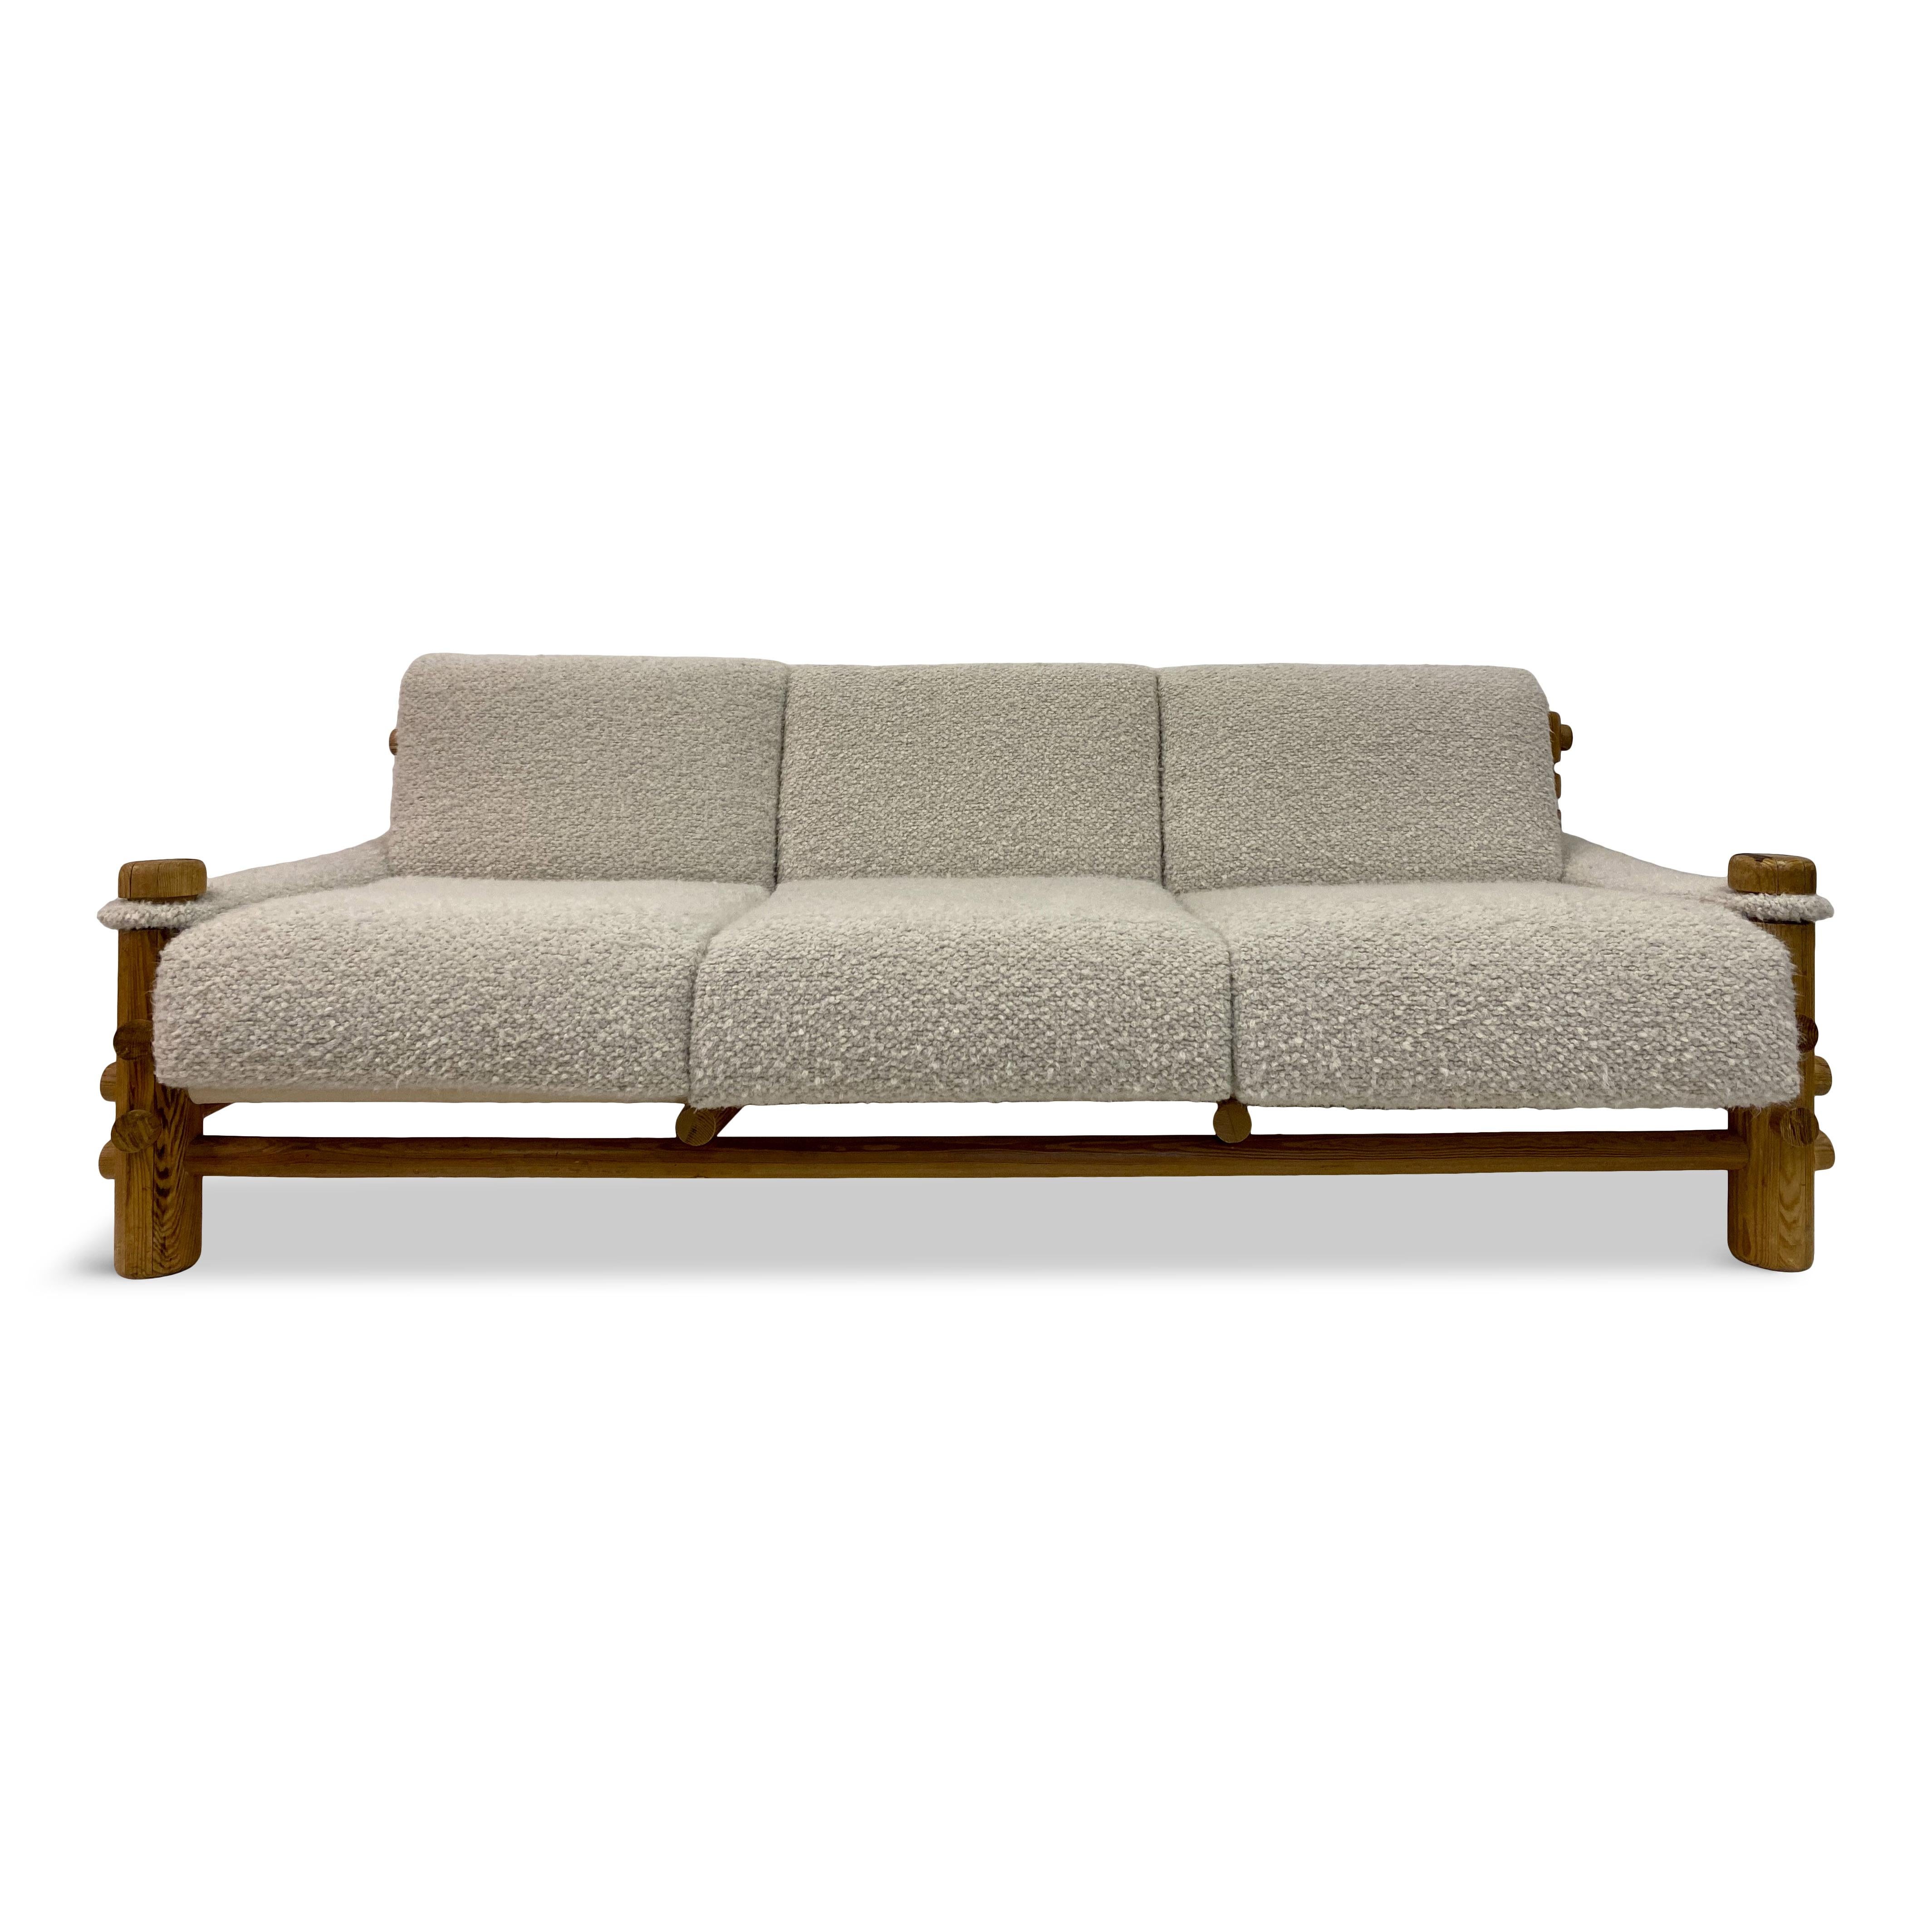 Alpine style sofa

Chunky cylindrical pine

New chunky two tone boucle weave

Woven with a textural fluffy yarn so very soft and tactile

Designers Guild fabric

Canvas seat and back supports

1970s.


 